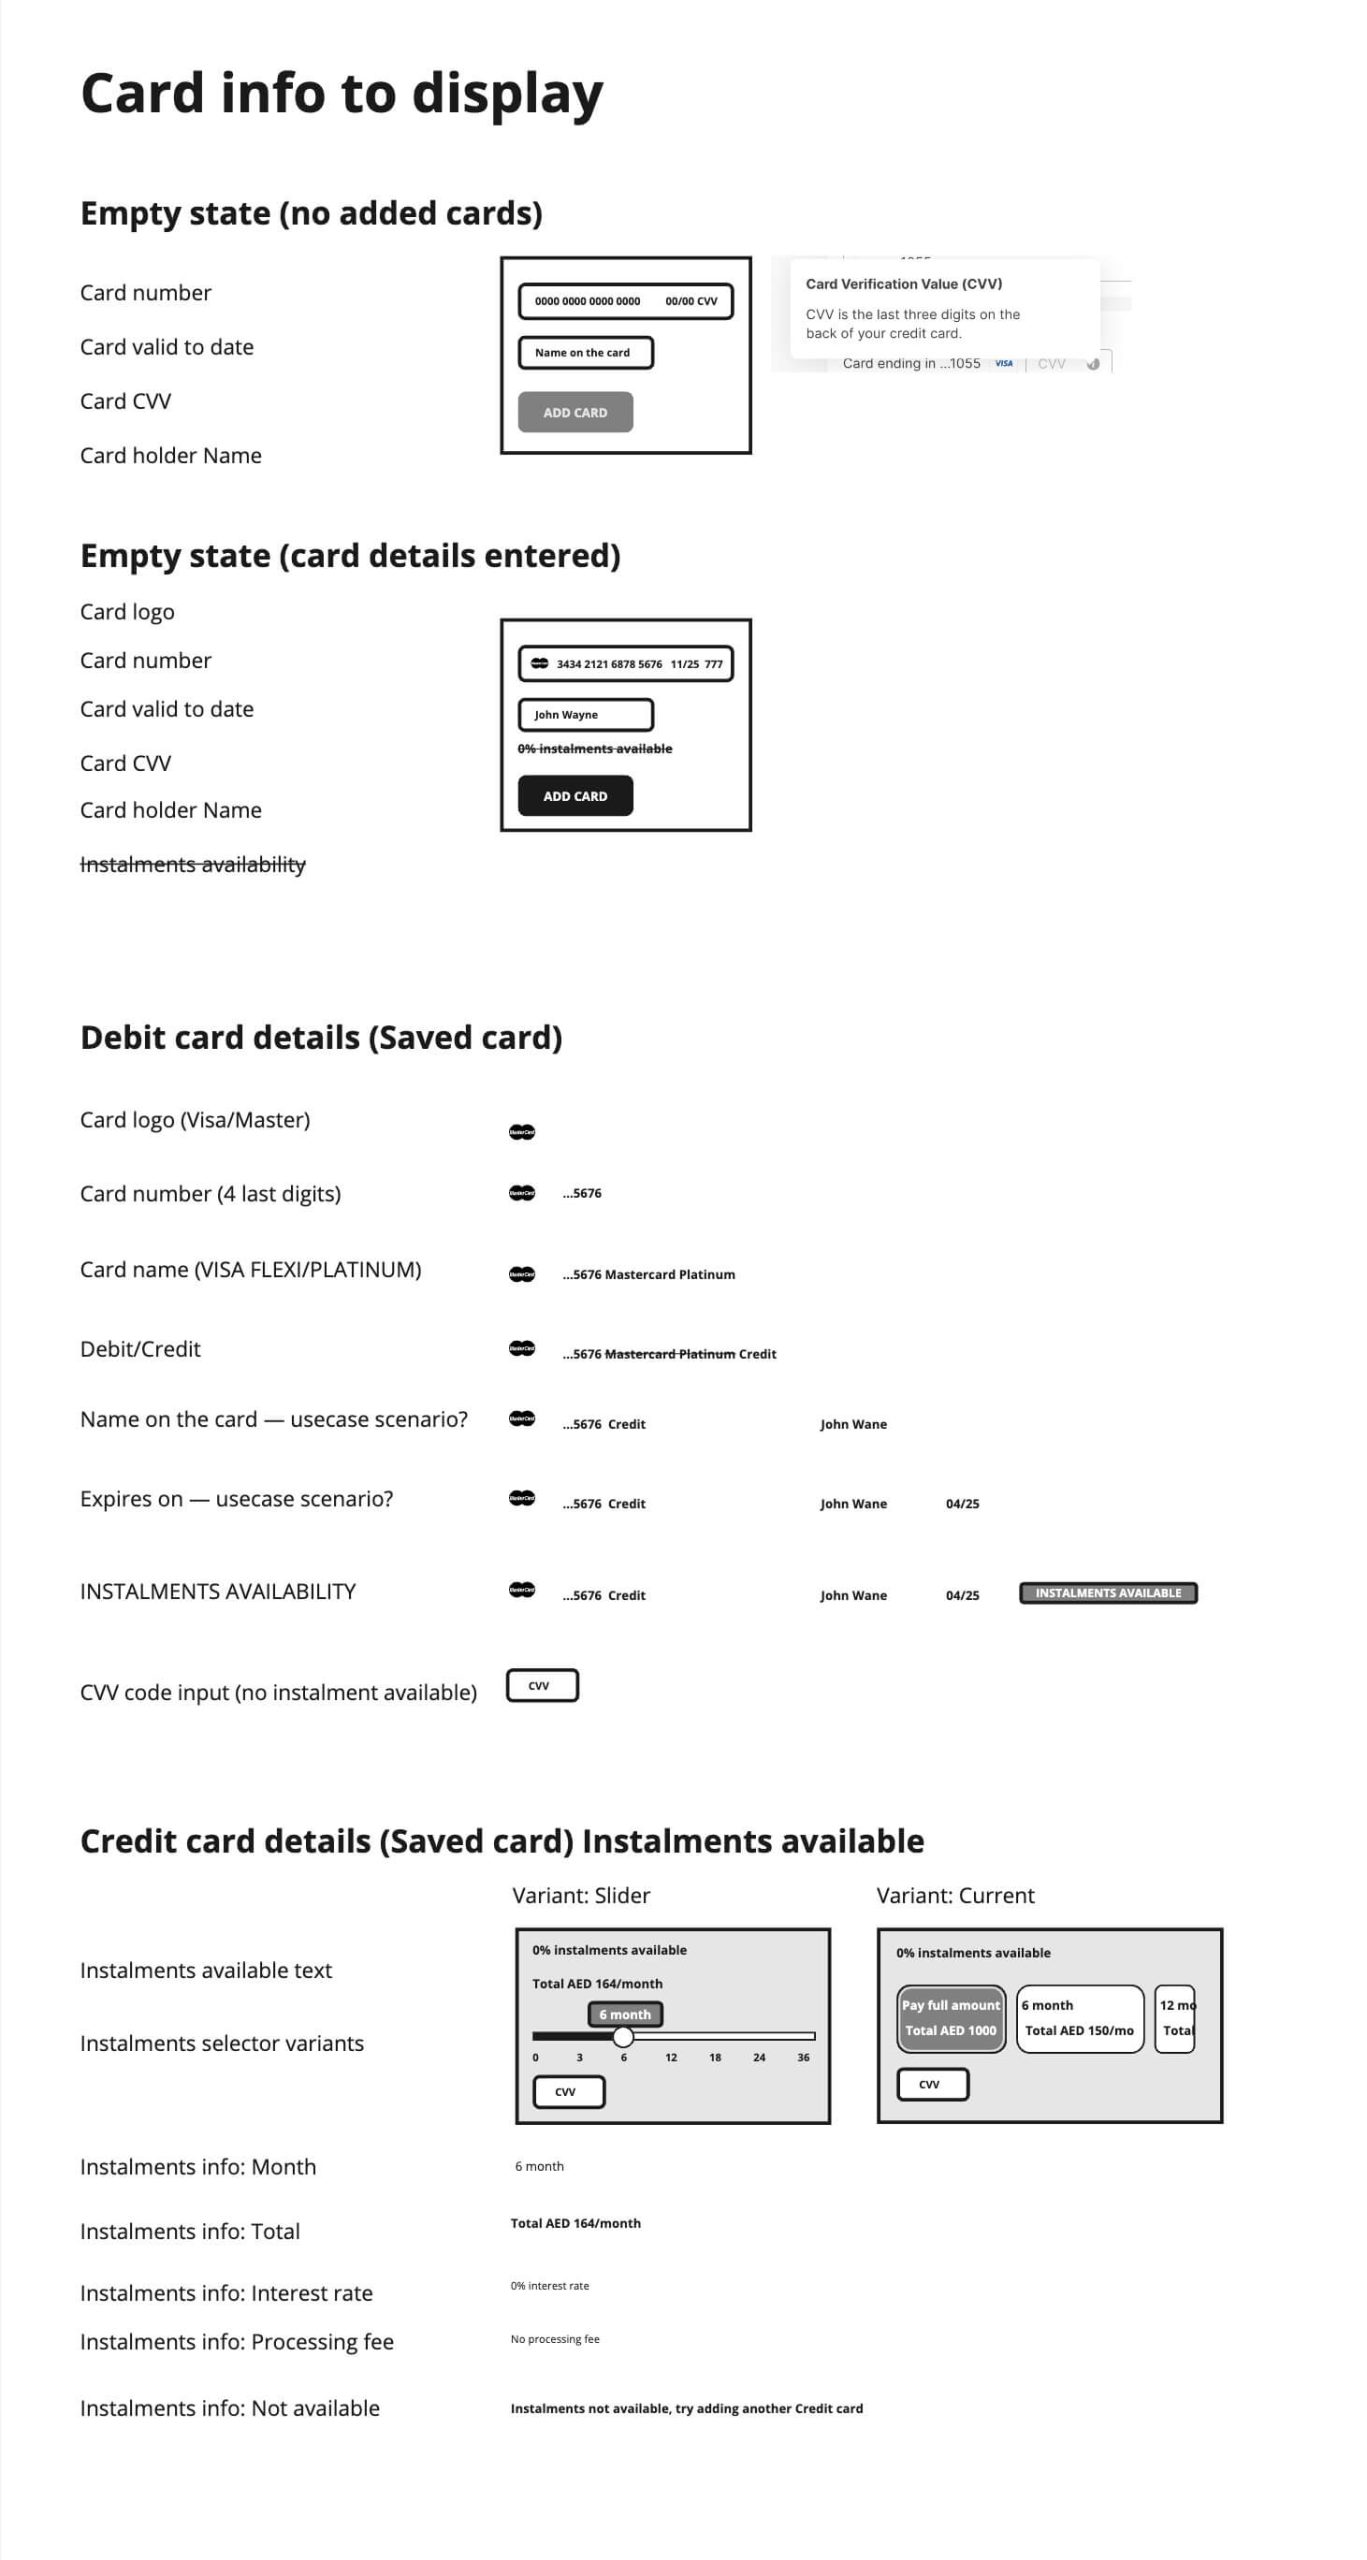 Credit/Debit card payment method breakdown and mapping